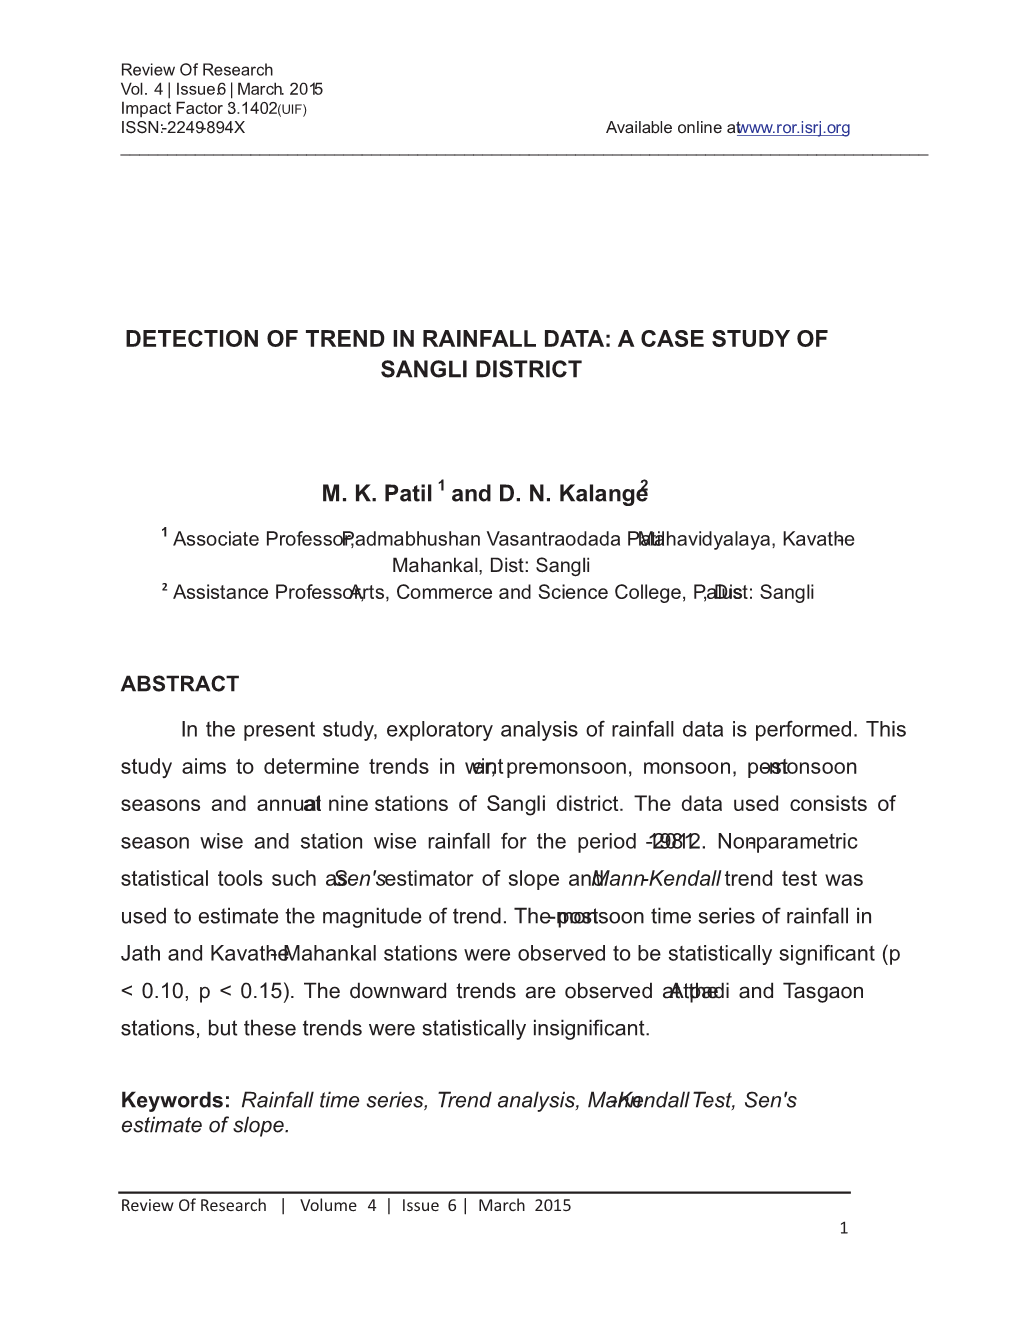 Detection of Trend in Rainfall Data: a Case Study of Sangli District